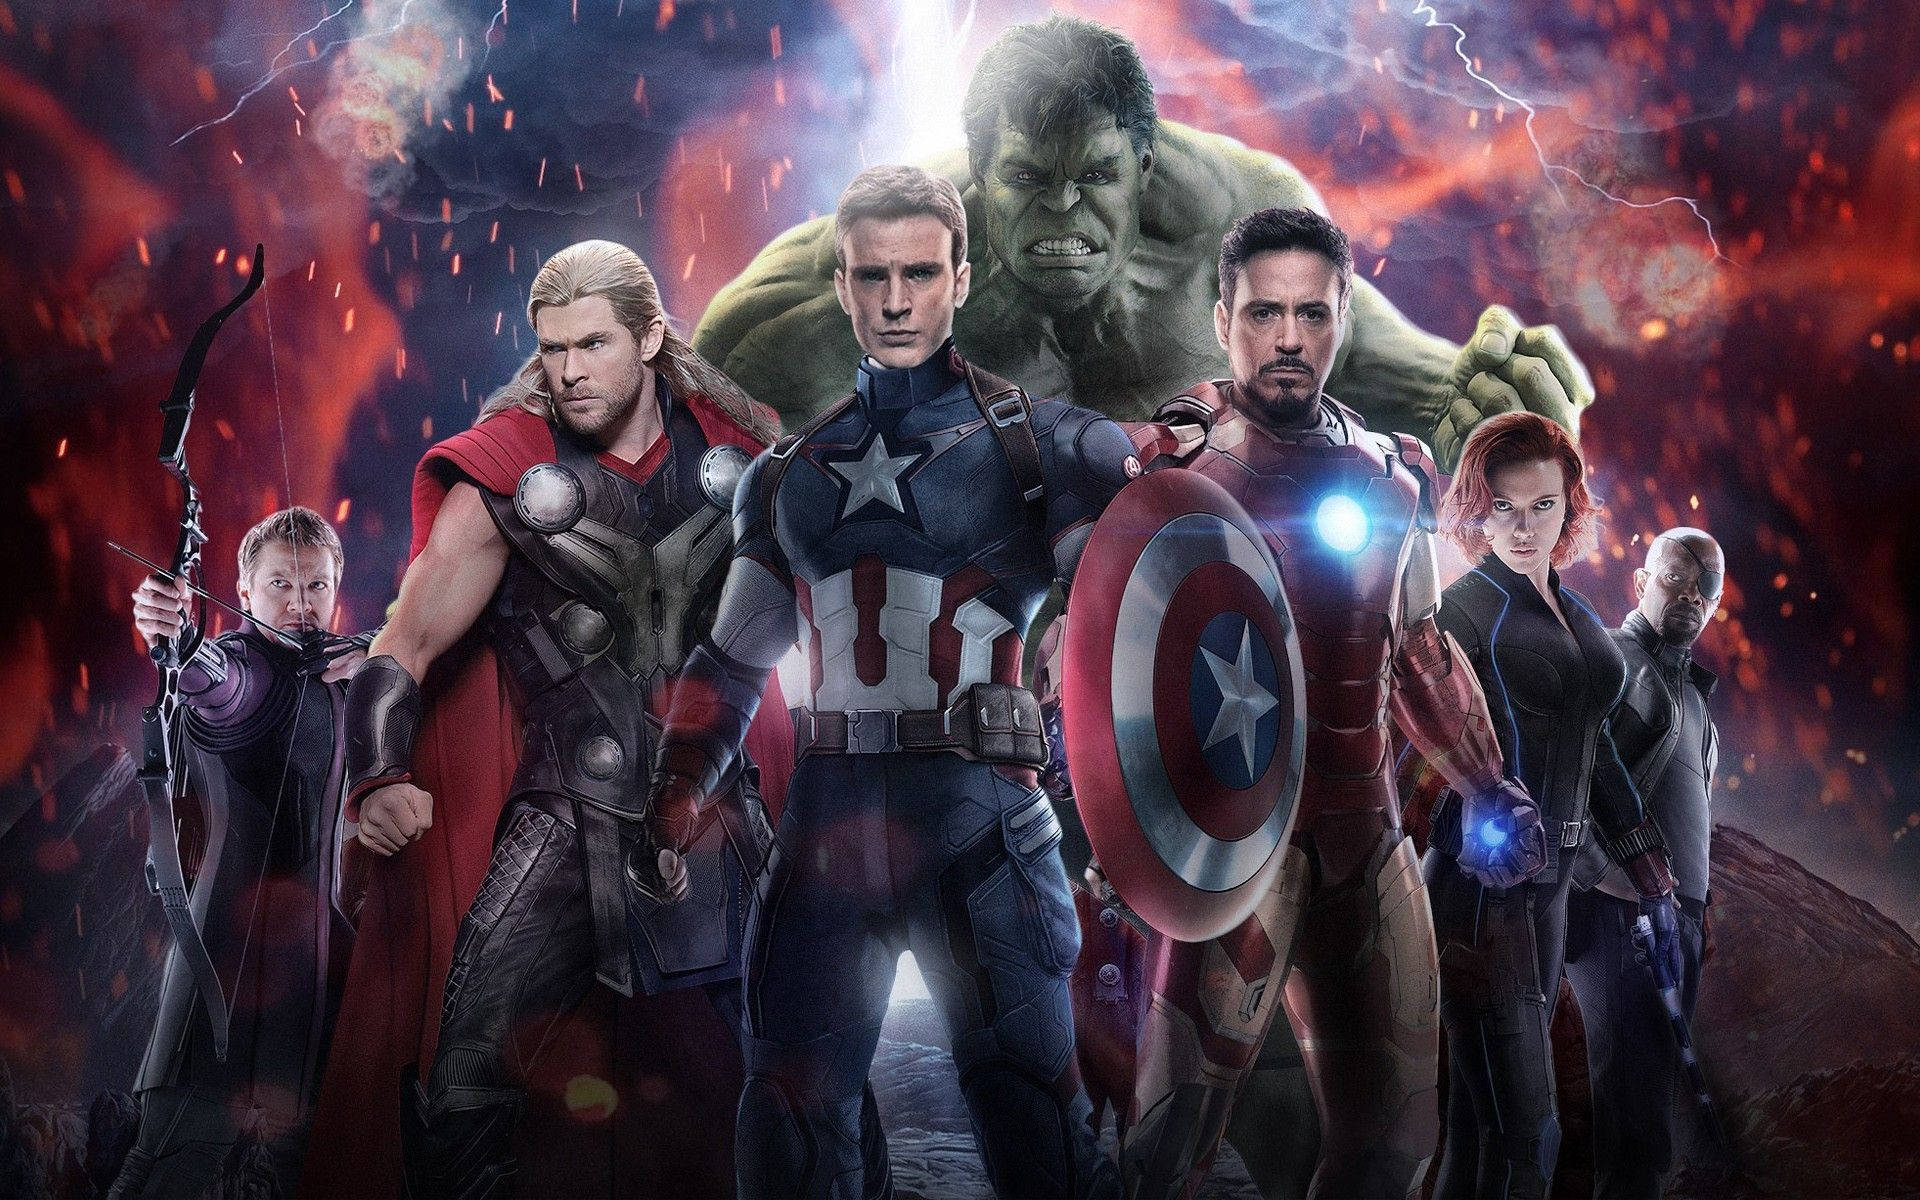 The Avengers team unites to save humanity in 